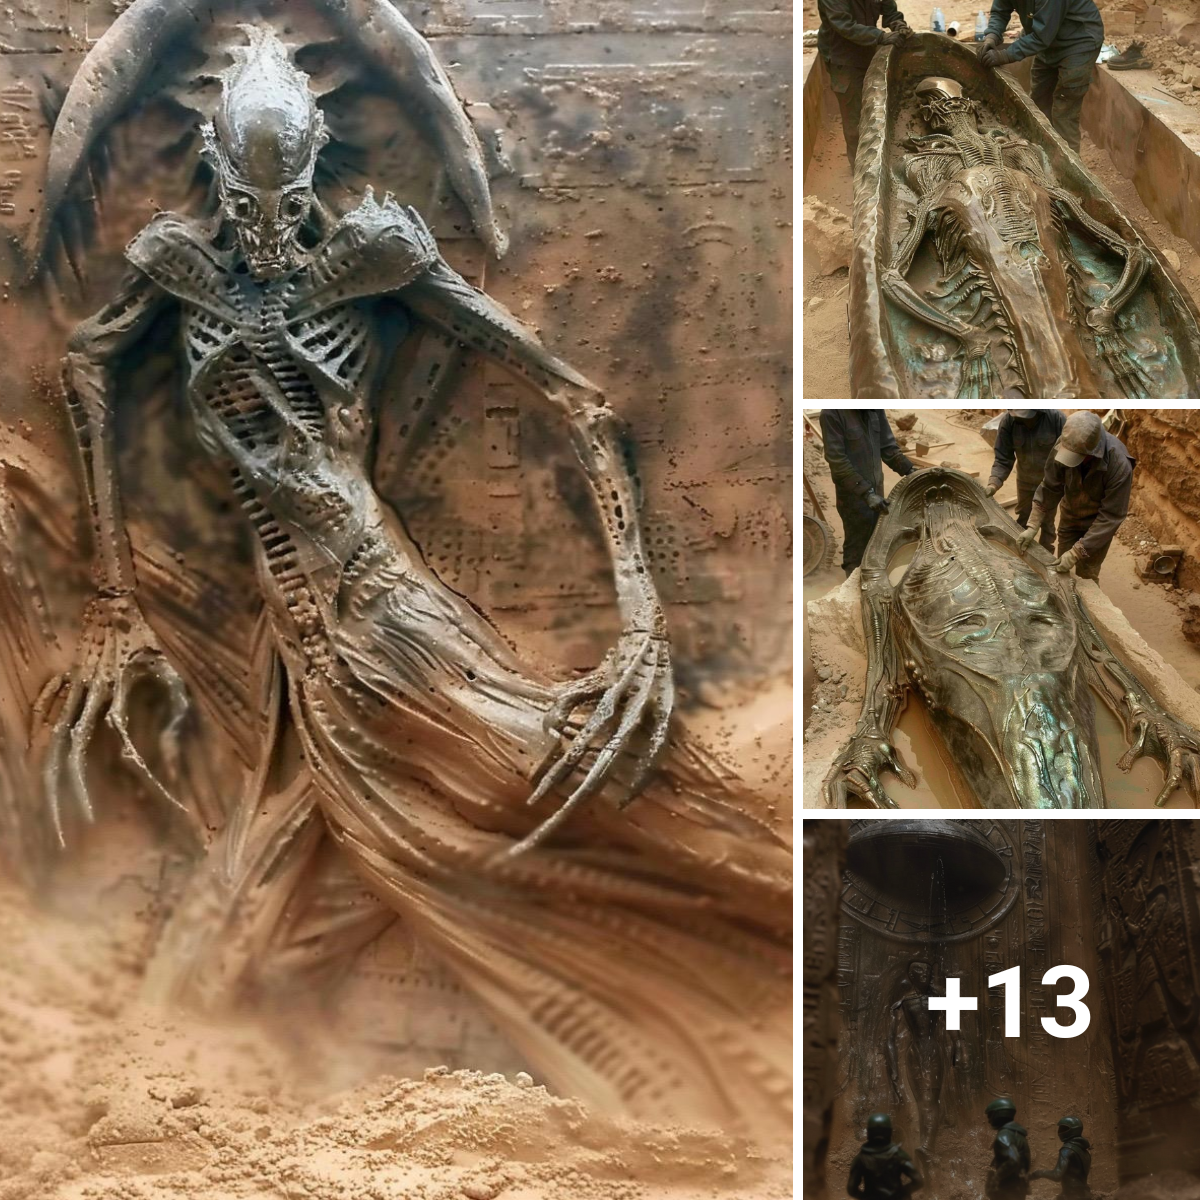 The incredible discoveries at Karahan Tepe include evidence of a culture that existed before recorded human history and other ancient alien civilizations.